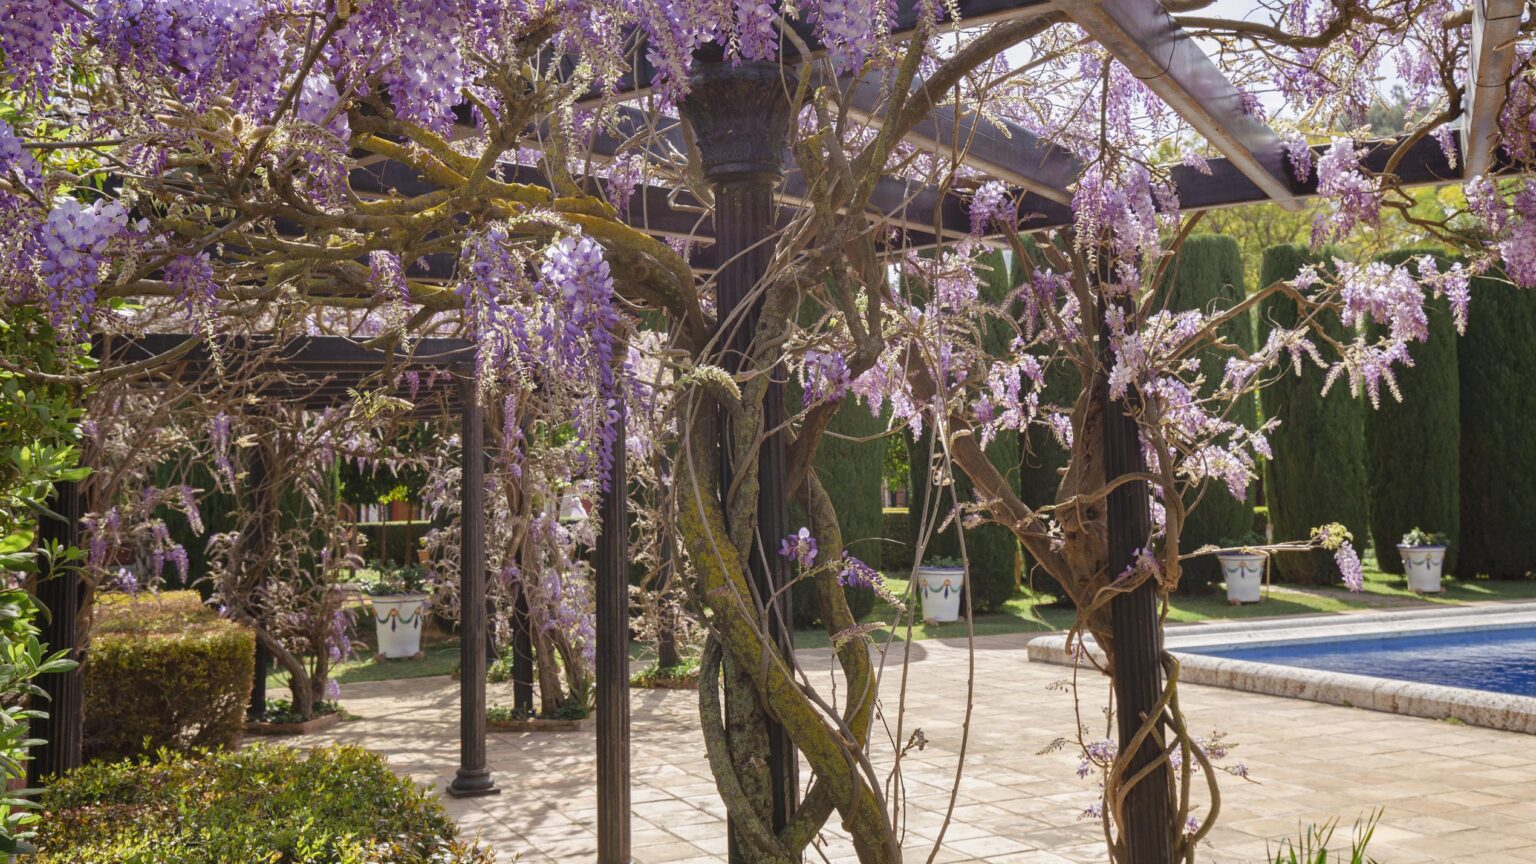 Arbour with wisteria on paved terrace next to swimming pool - Mediterranean garden features